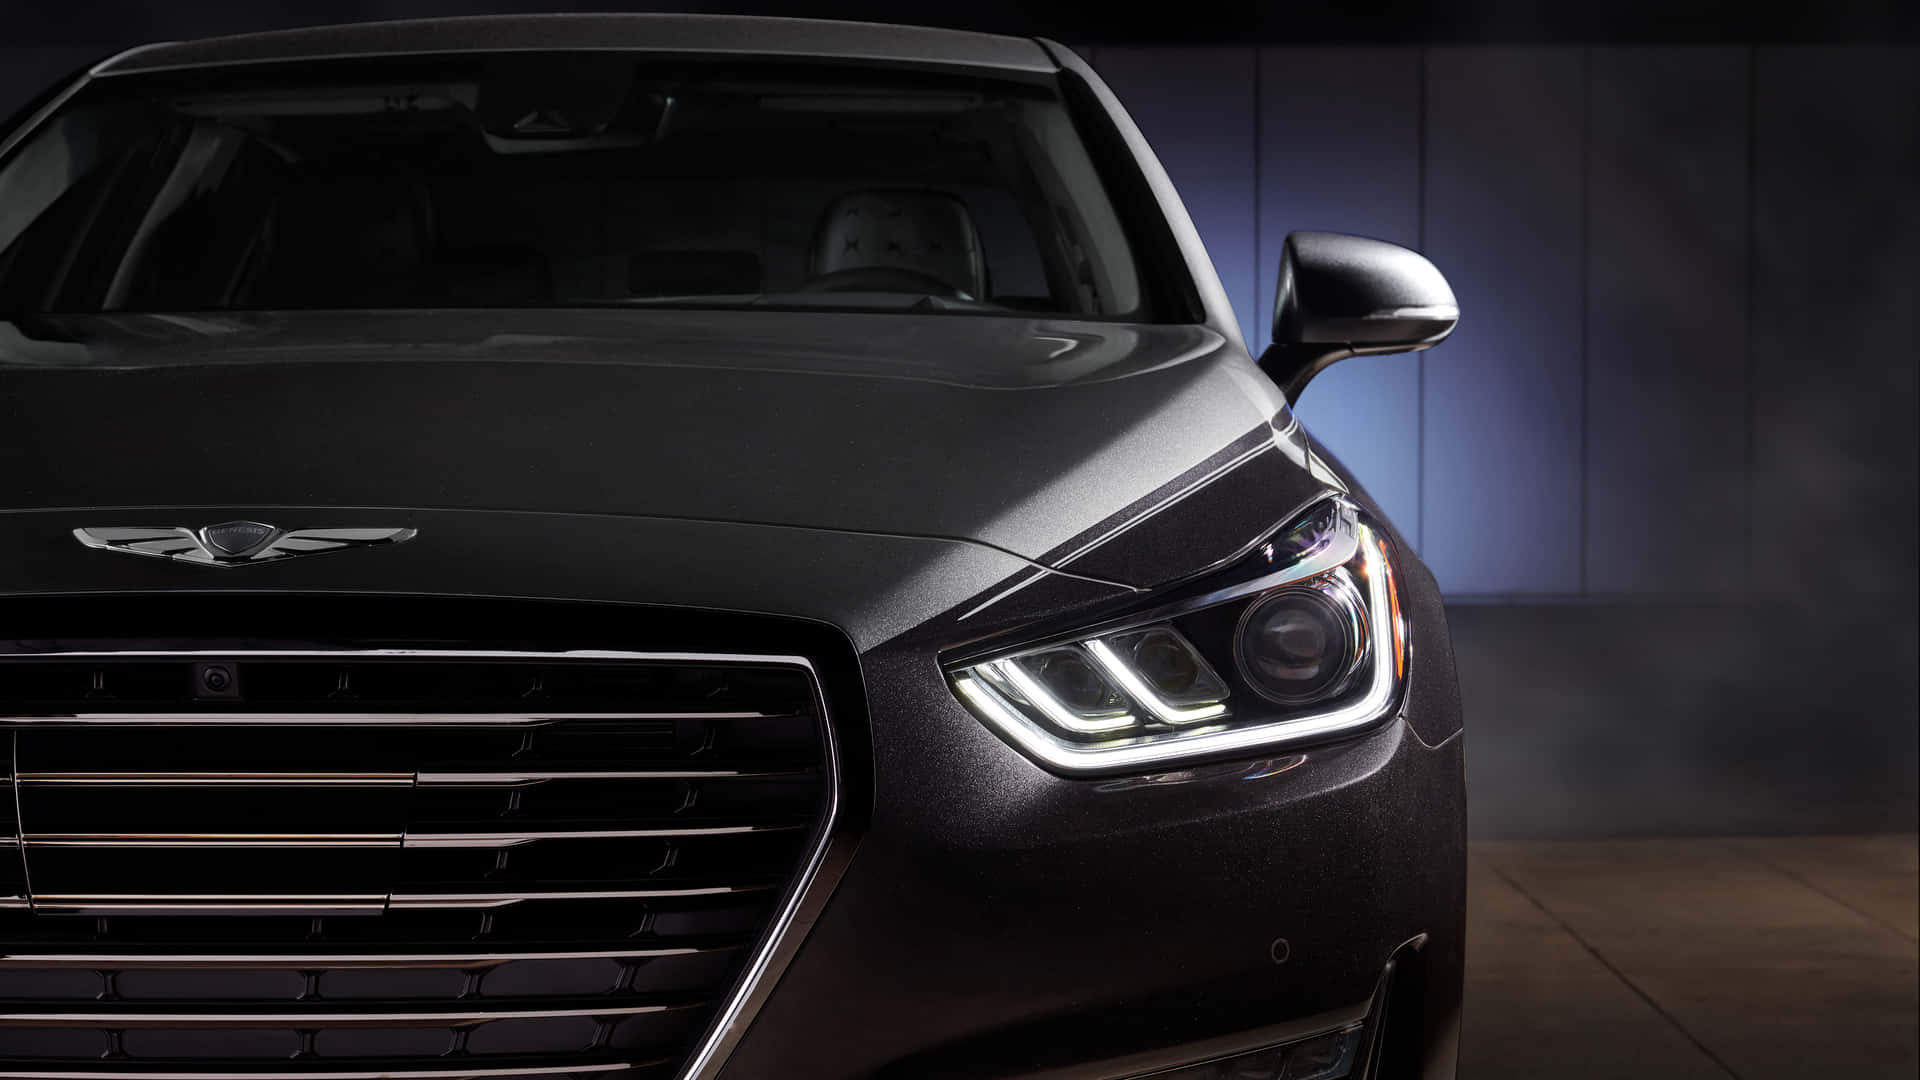 A luxurious Genesis G90 parked on a city street at night Wallpaper